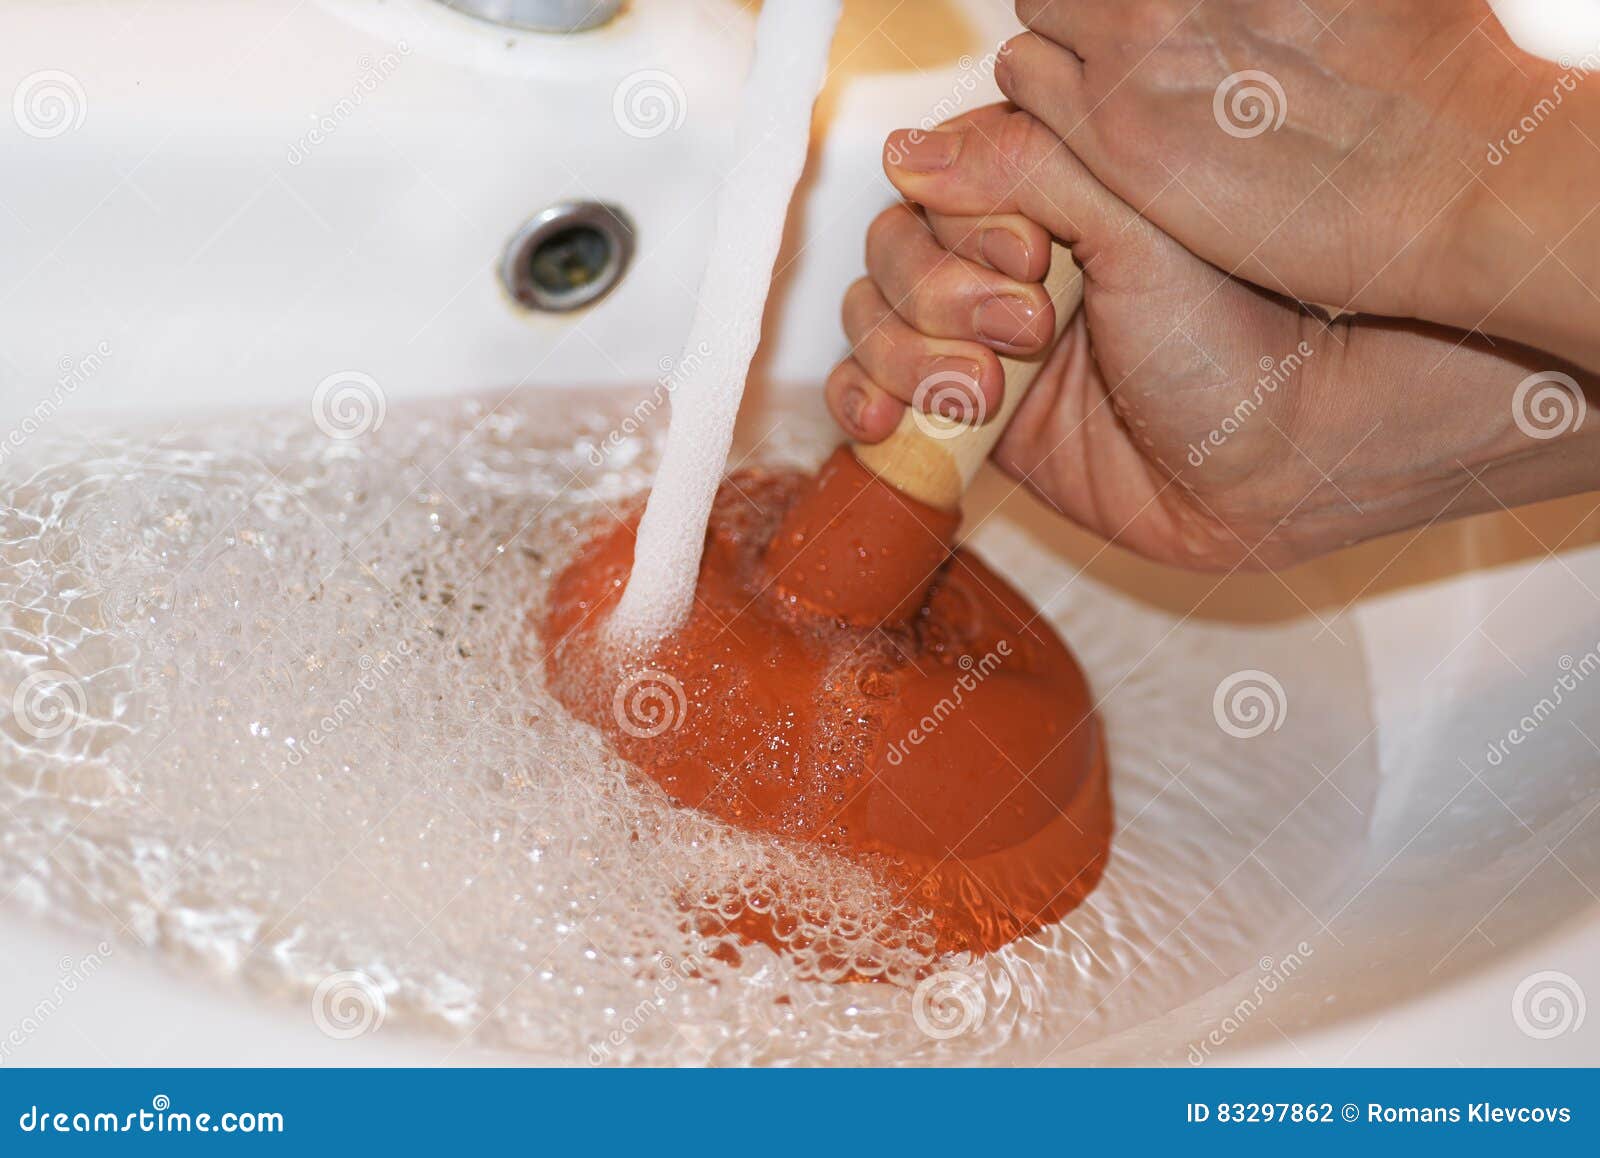 woman with plunger trying to remove clogged sinks.